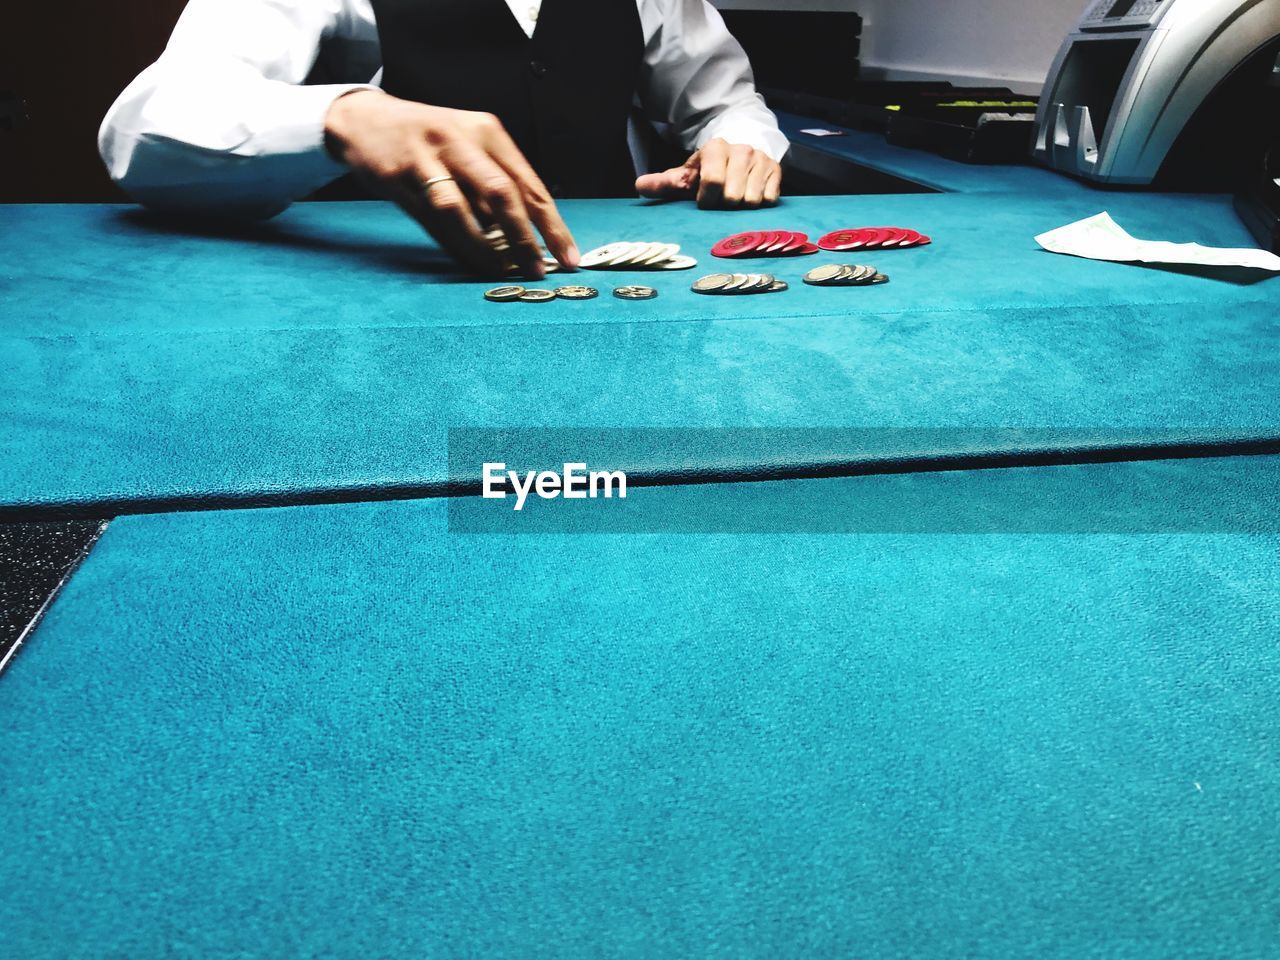 Midsection on man playing poker on table